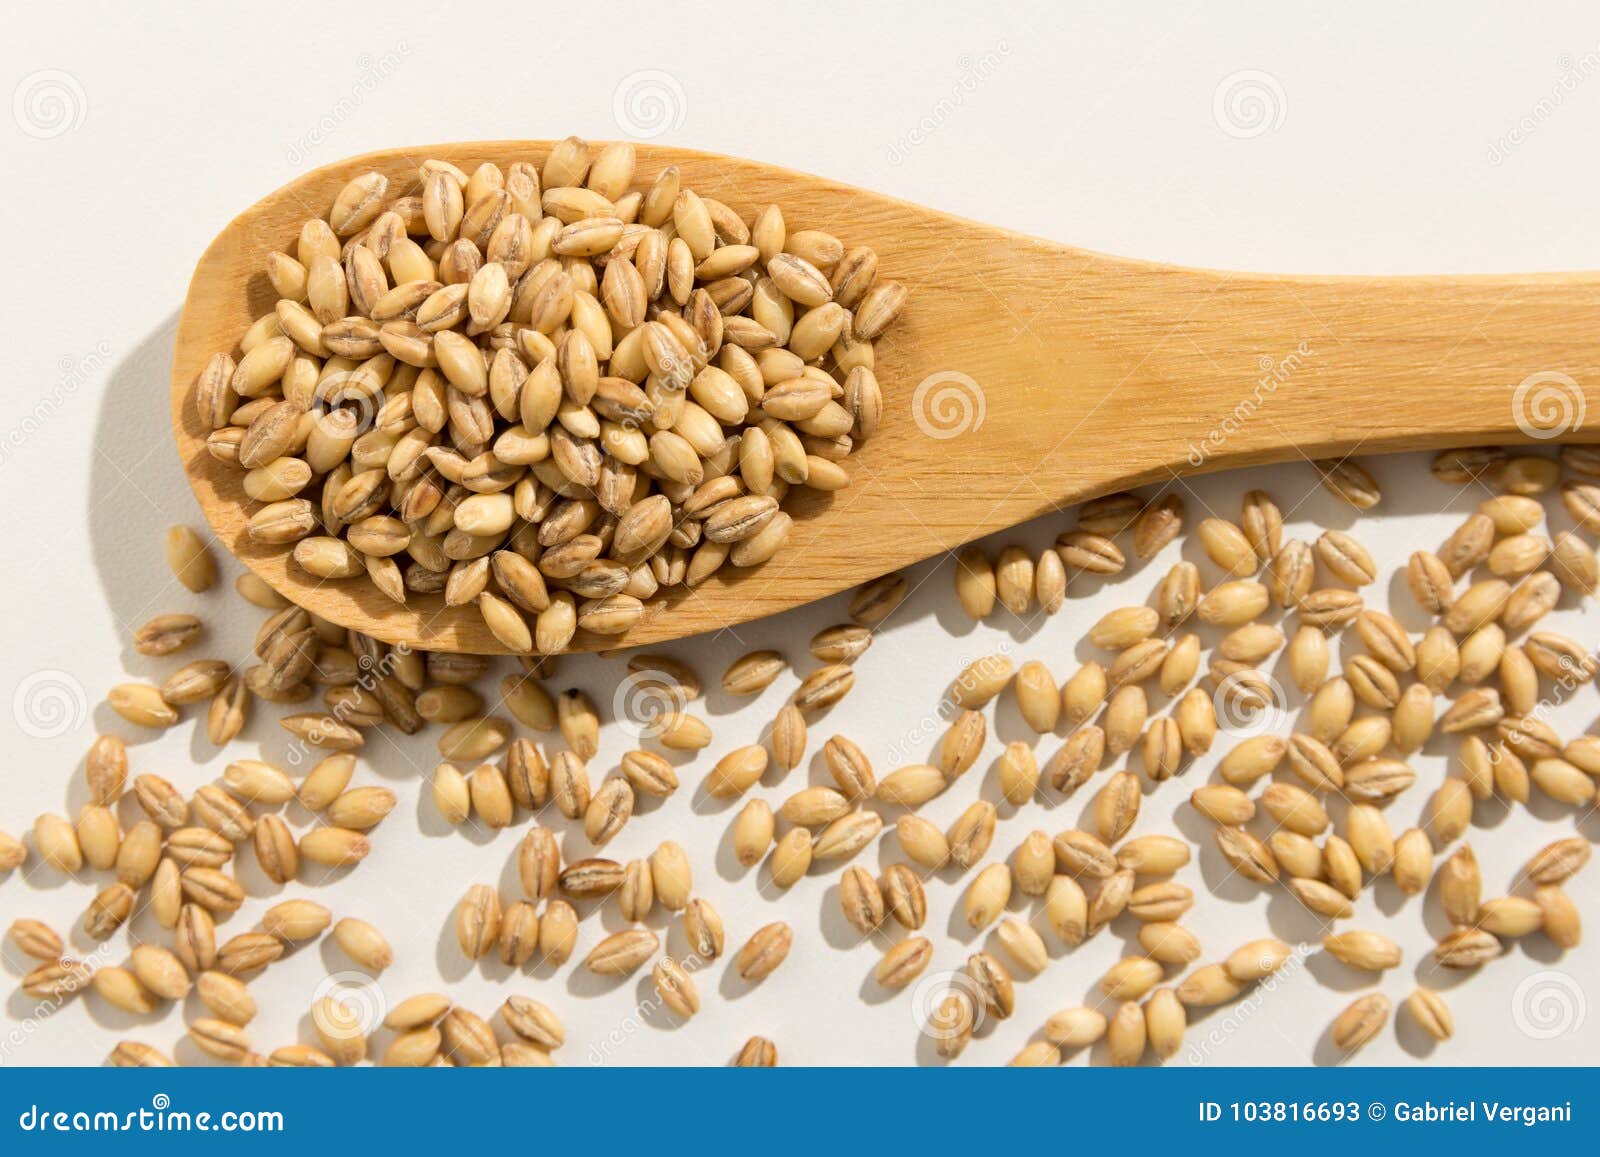 barley cereal grain. healthy grains on a wooden spoon. white background.